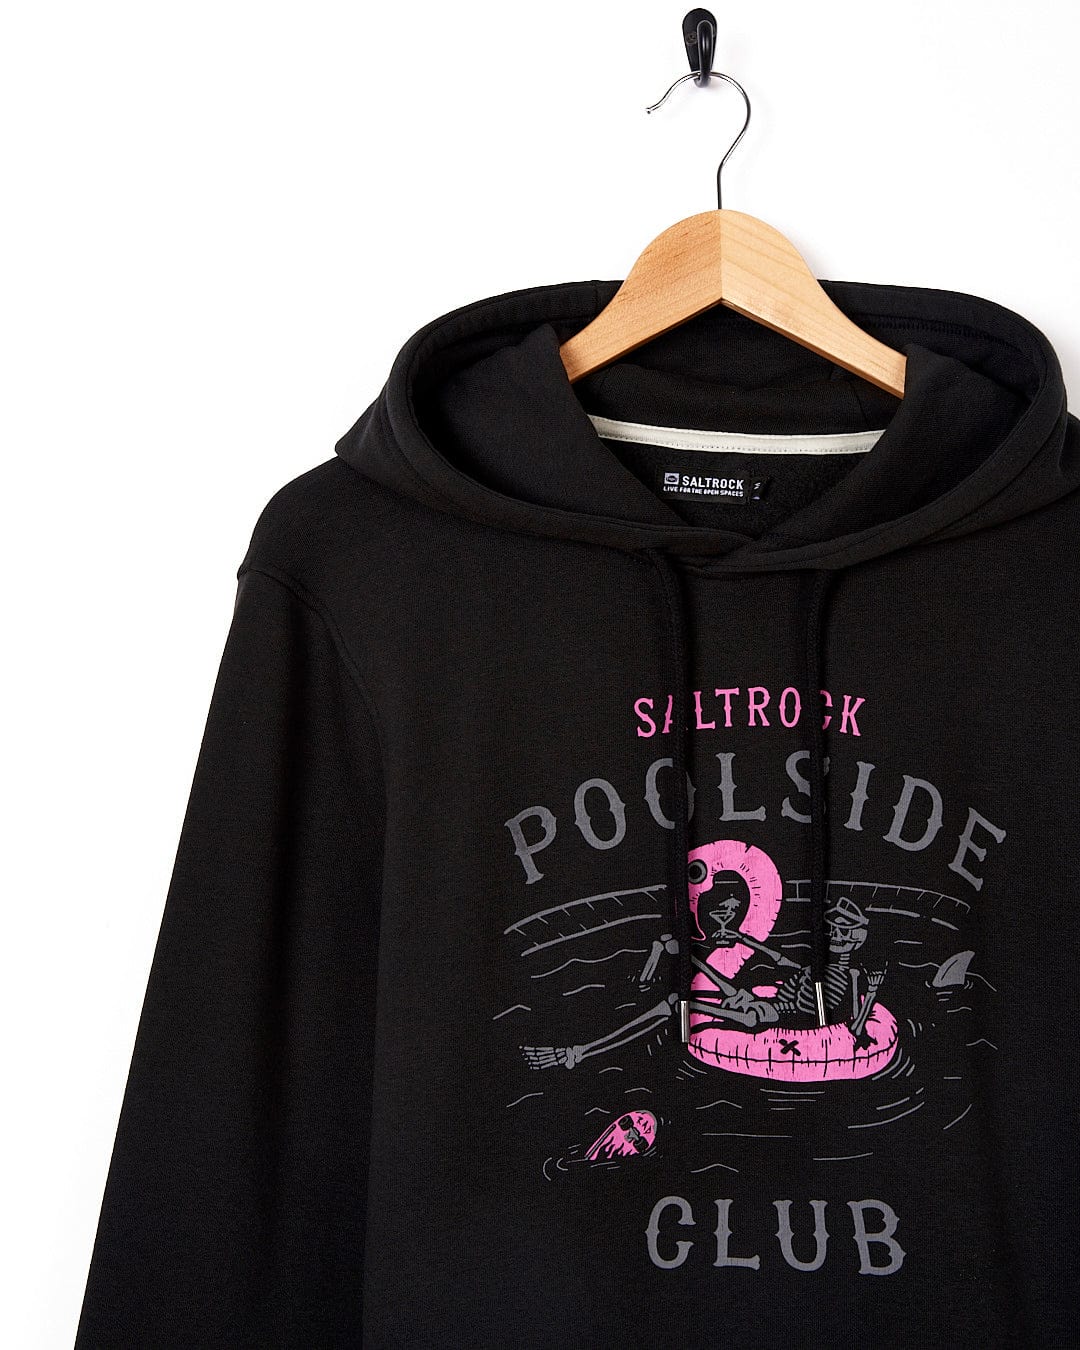 A black hoodie with the words "poolside club" on it, called the Poolside - Mens Pop Hoodie - Black by Saltrock.